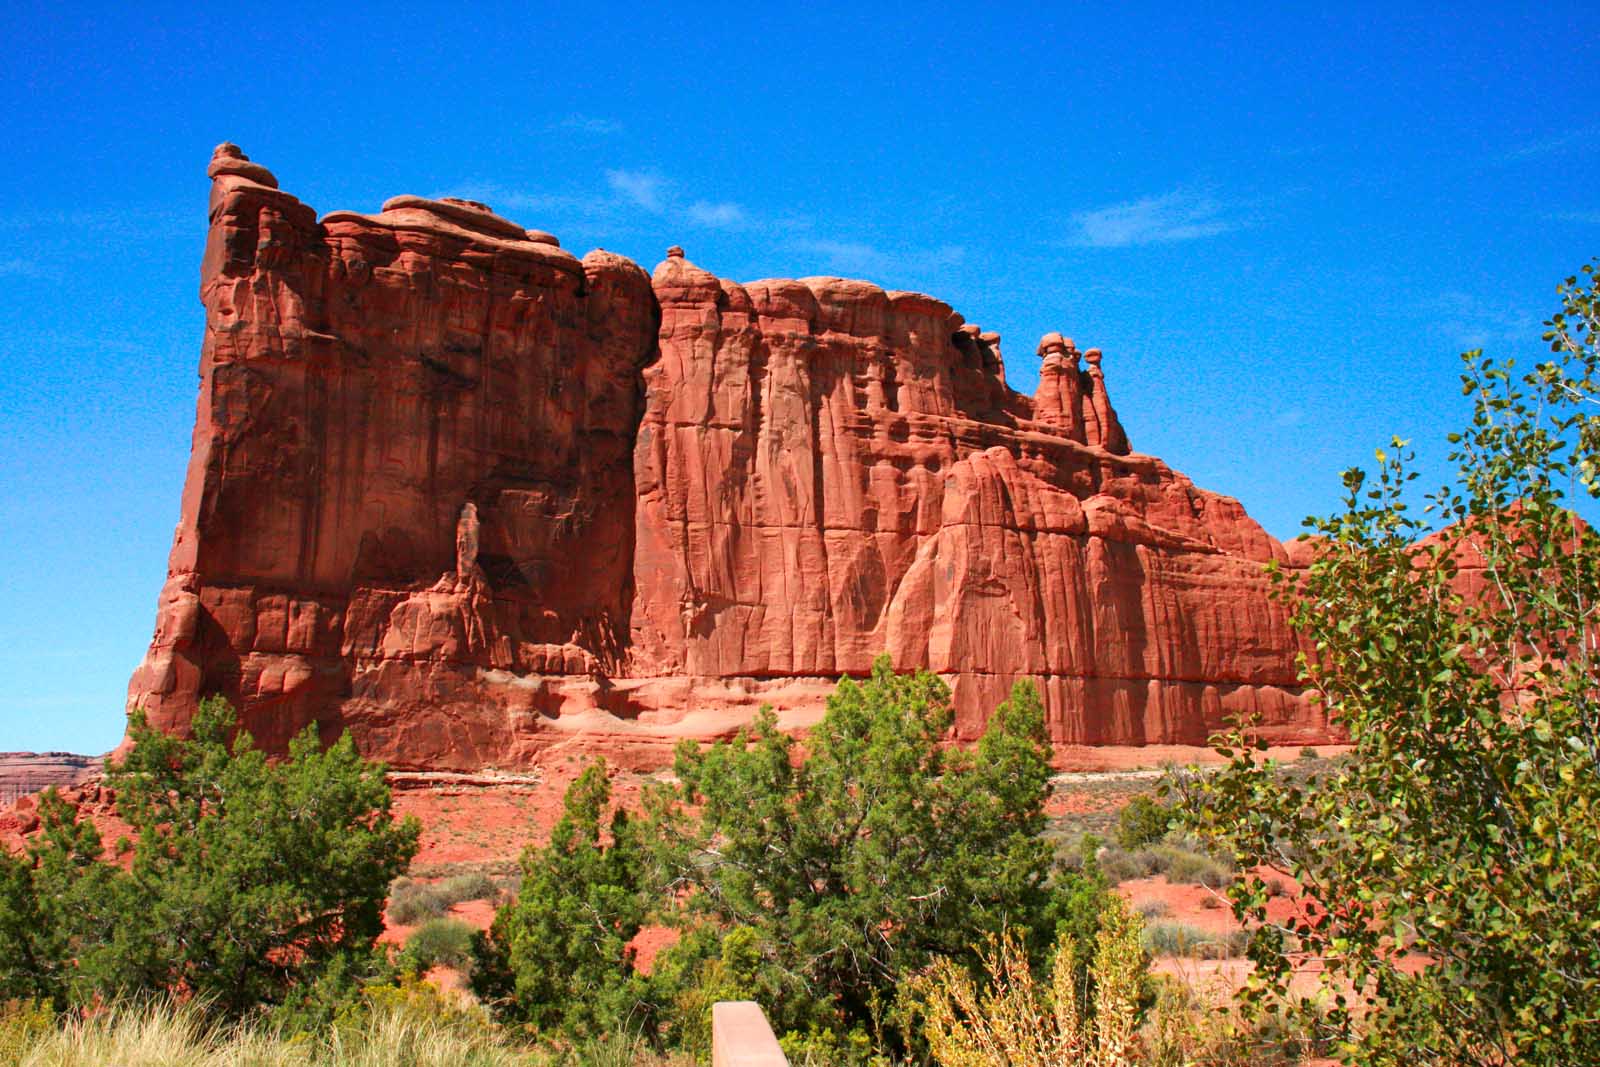 Park Avene Trail in Arches National Park